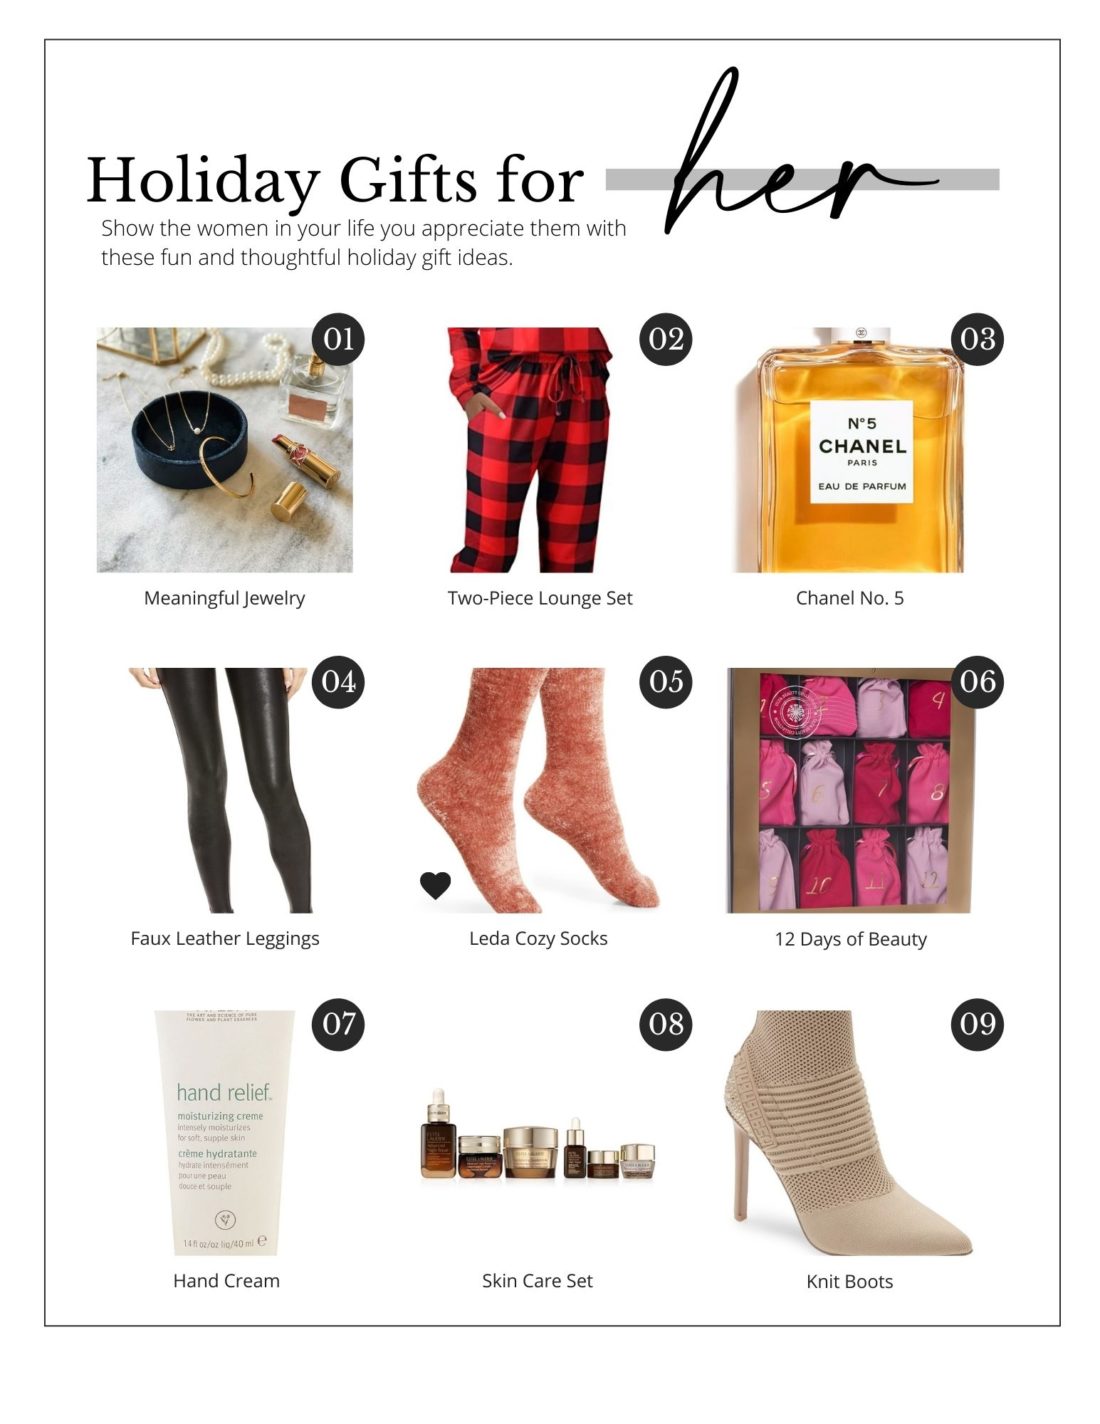 Holiday Gift Guide For Her 2021